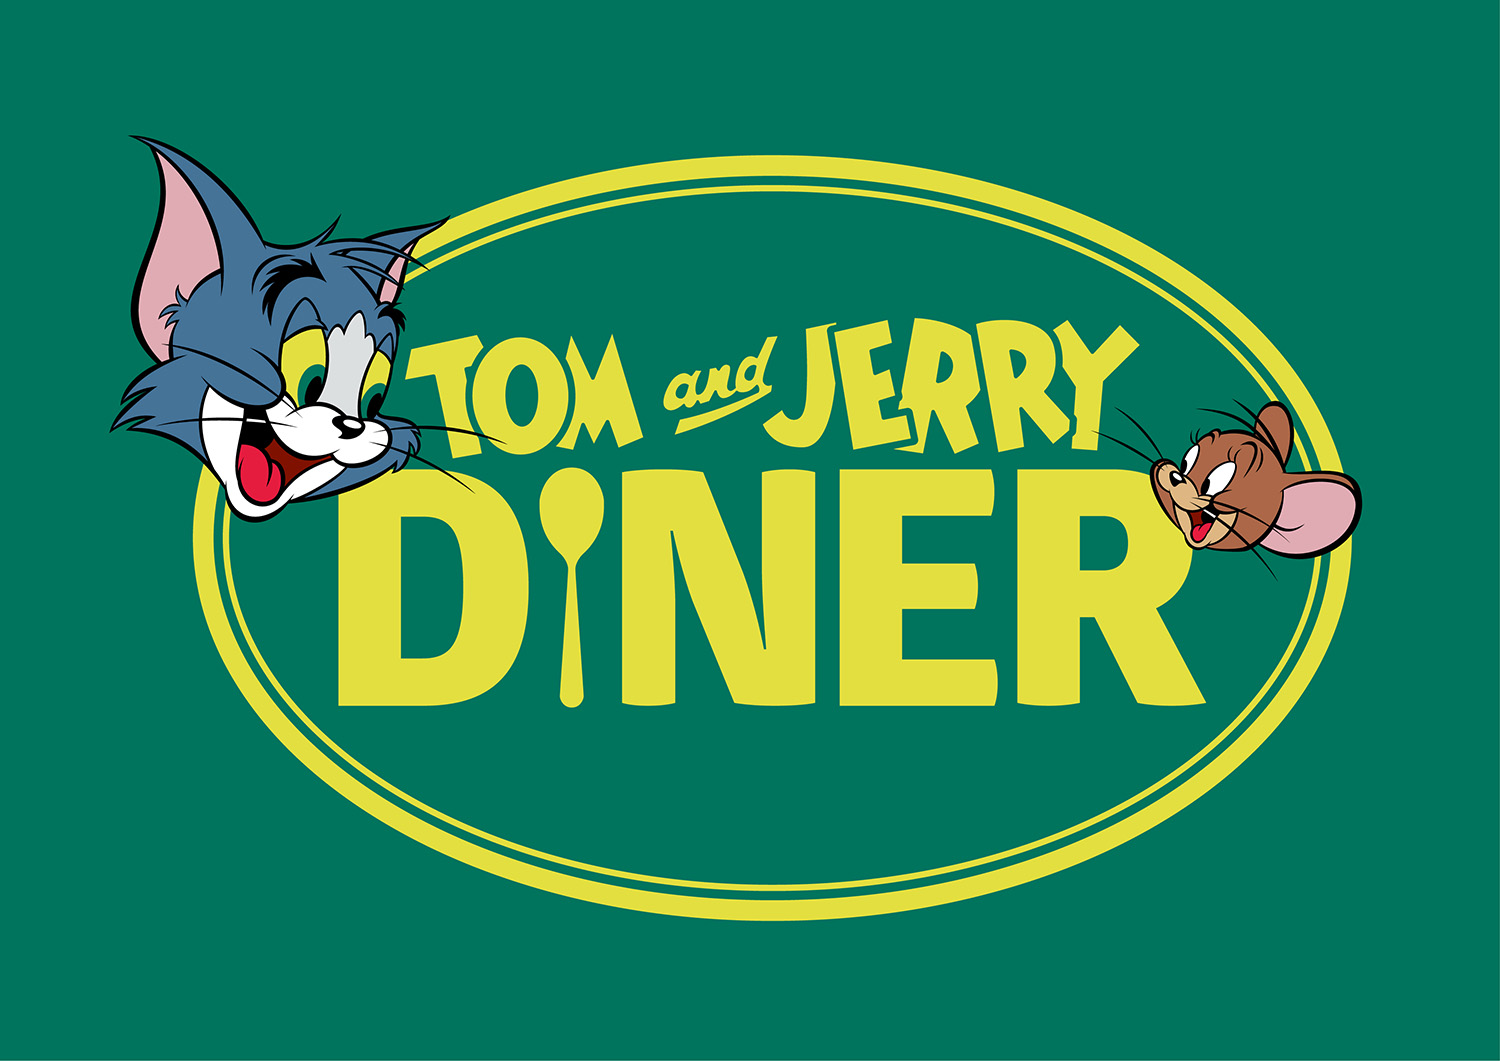 TOM AND JERRY and all related characters and elements © & ™ Turner Entertainment Co. (s23)